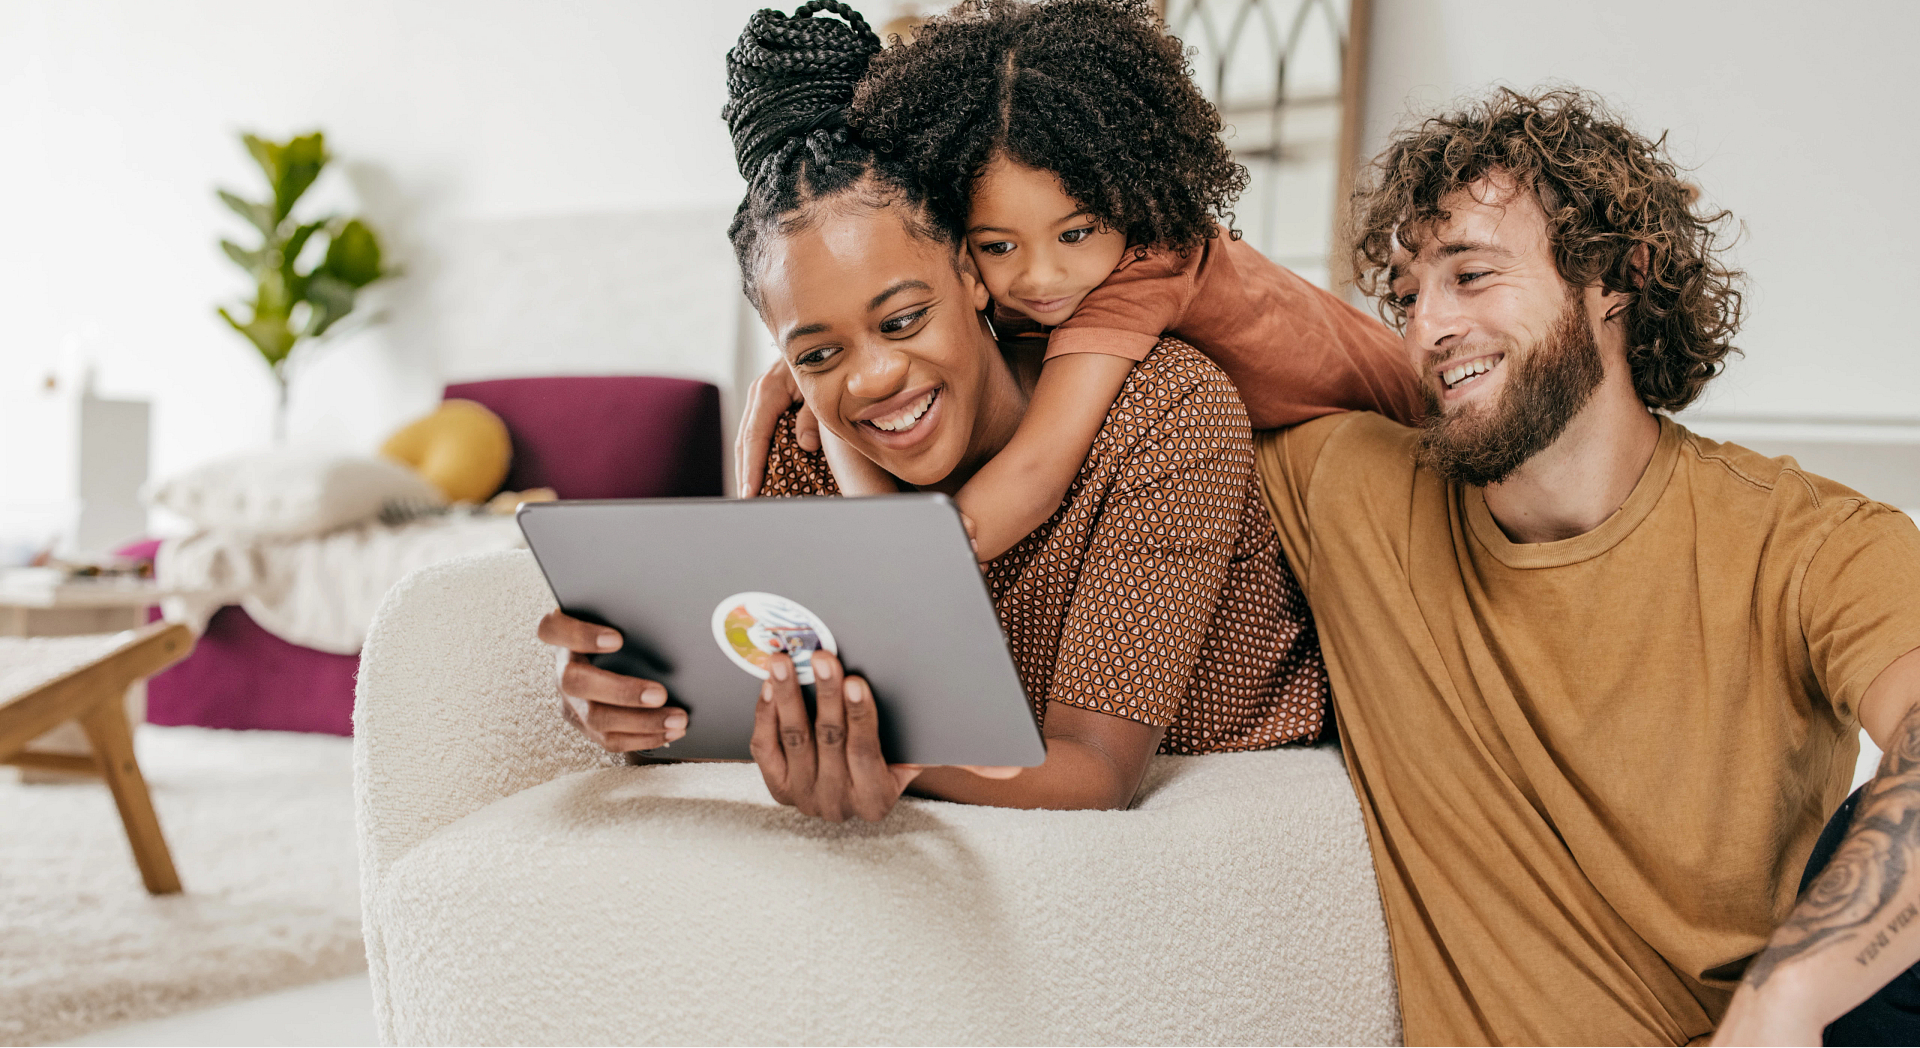 A family of three smiling while looking at a tablet.